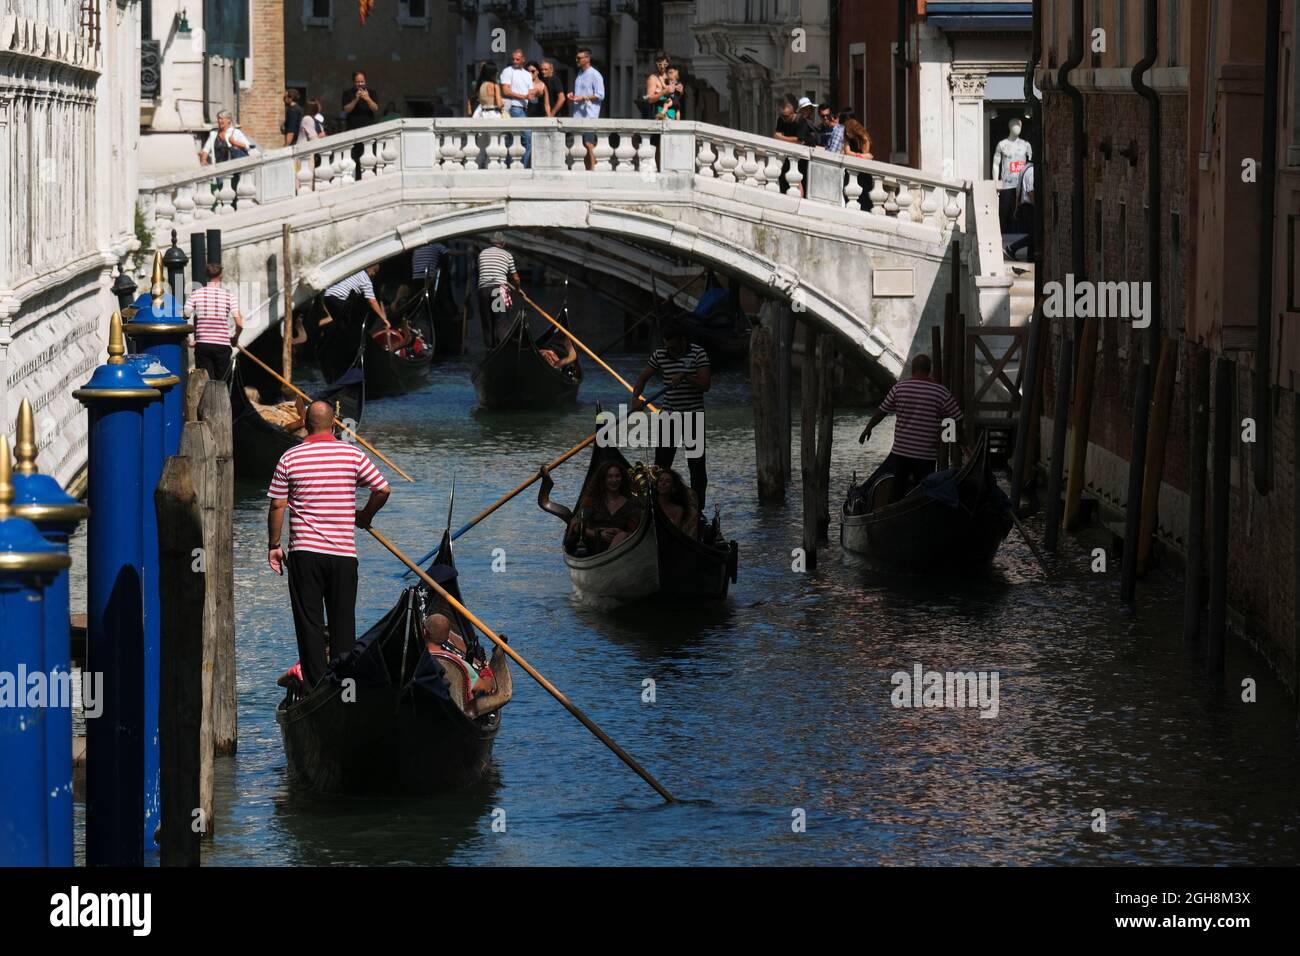 Tourists visit Venice as the municipality prepares to charge them up to 10 Euro for entry into the lagoon city, in order to cut down the number of visitors, in Venice, Italy, September 5, 2021. Picture taken September 5, 2021. REUTERS/Manuel Silvestri Stock Photo